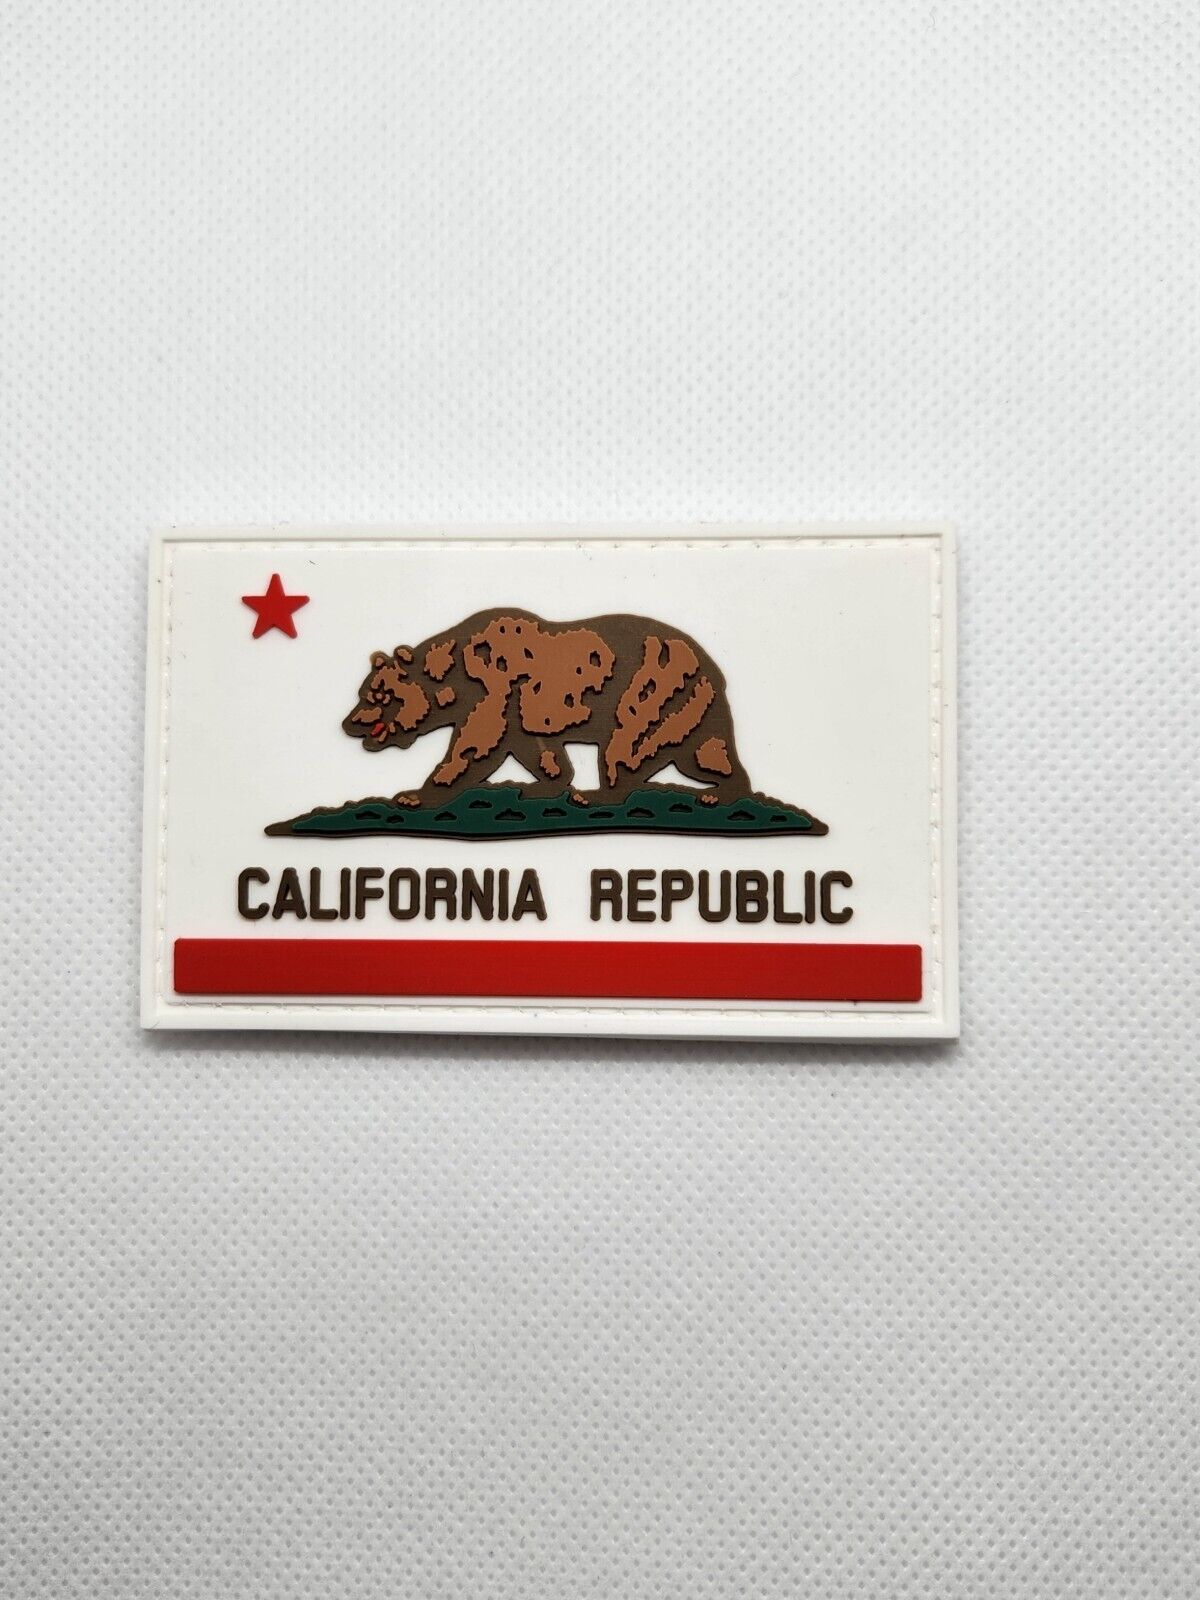 California Flag 3D PVC Tactical Morale Patch – Hook Backed